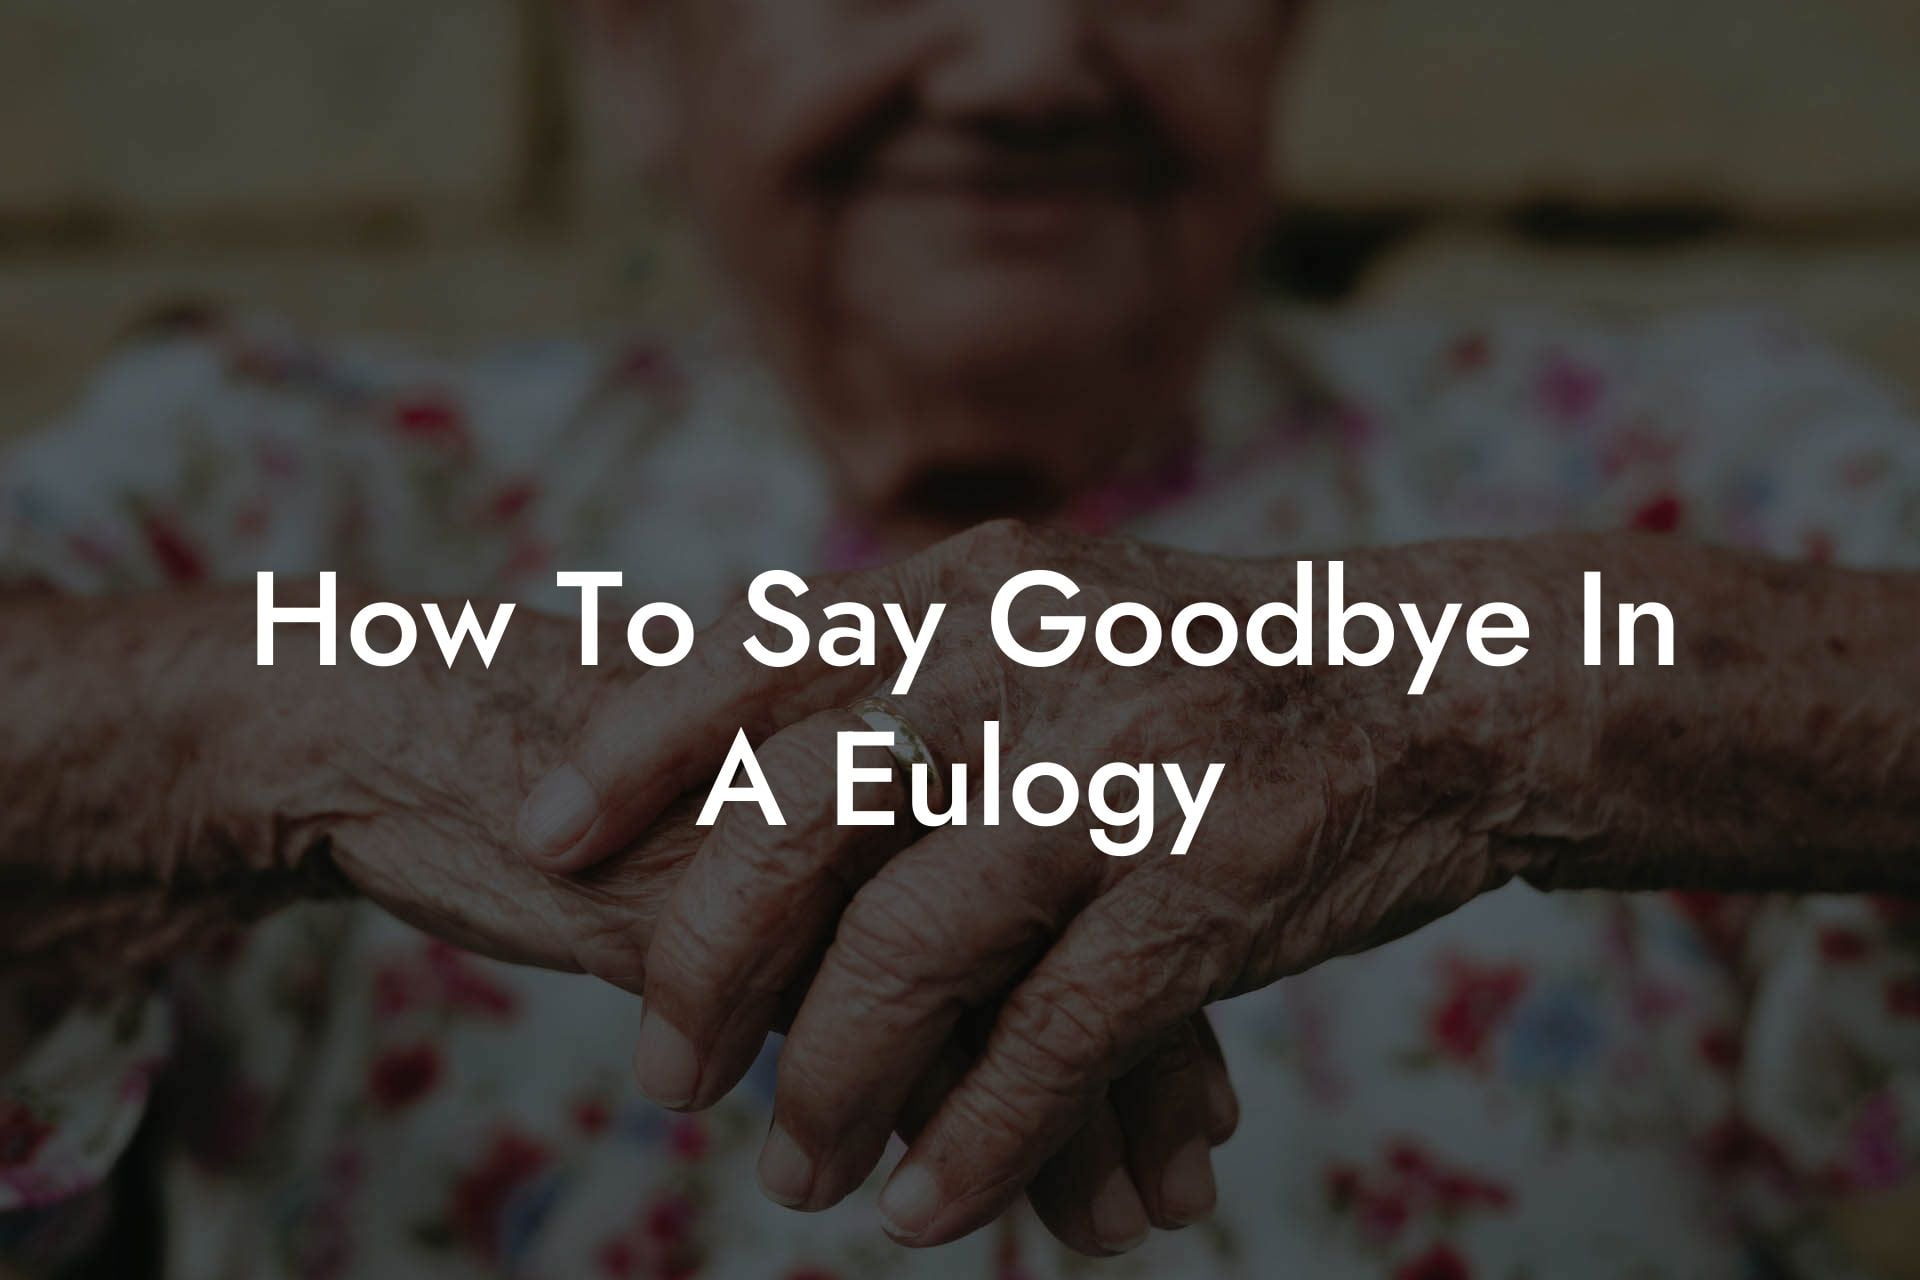 How To Say Goodbye In A Eulogy